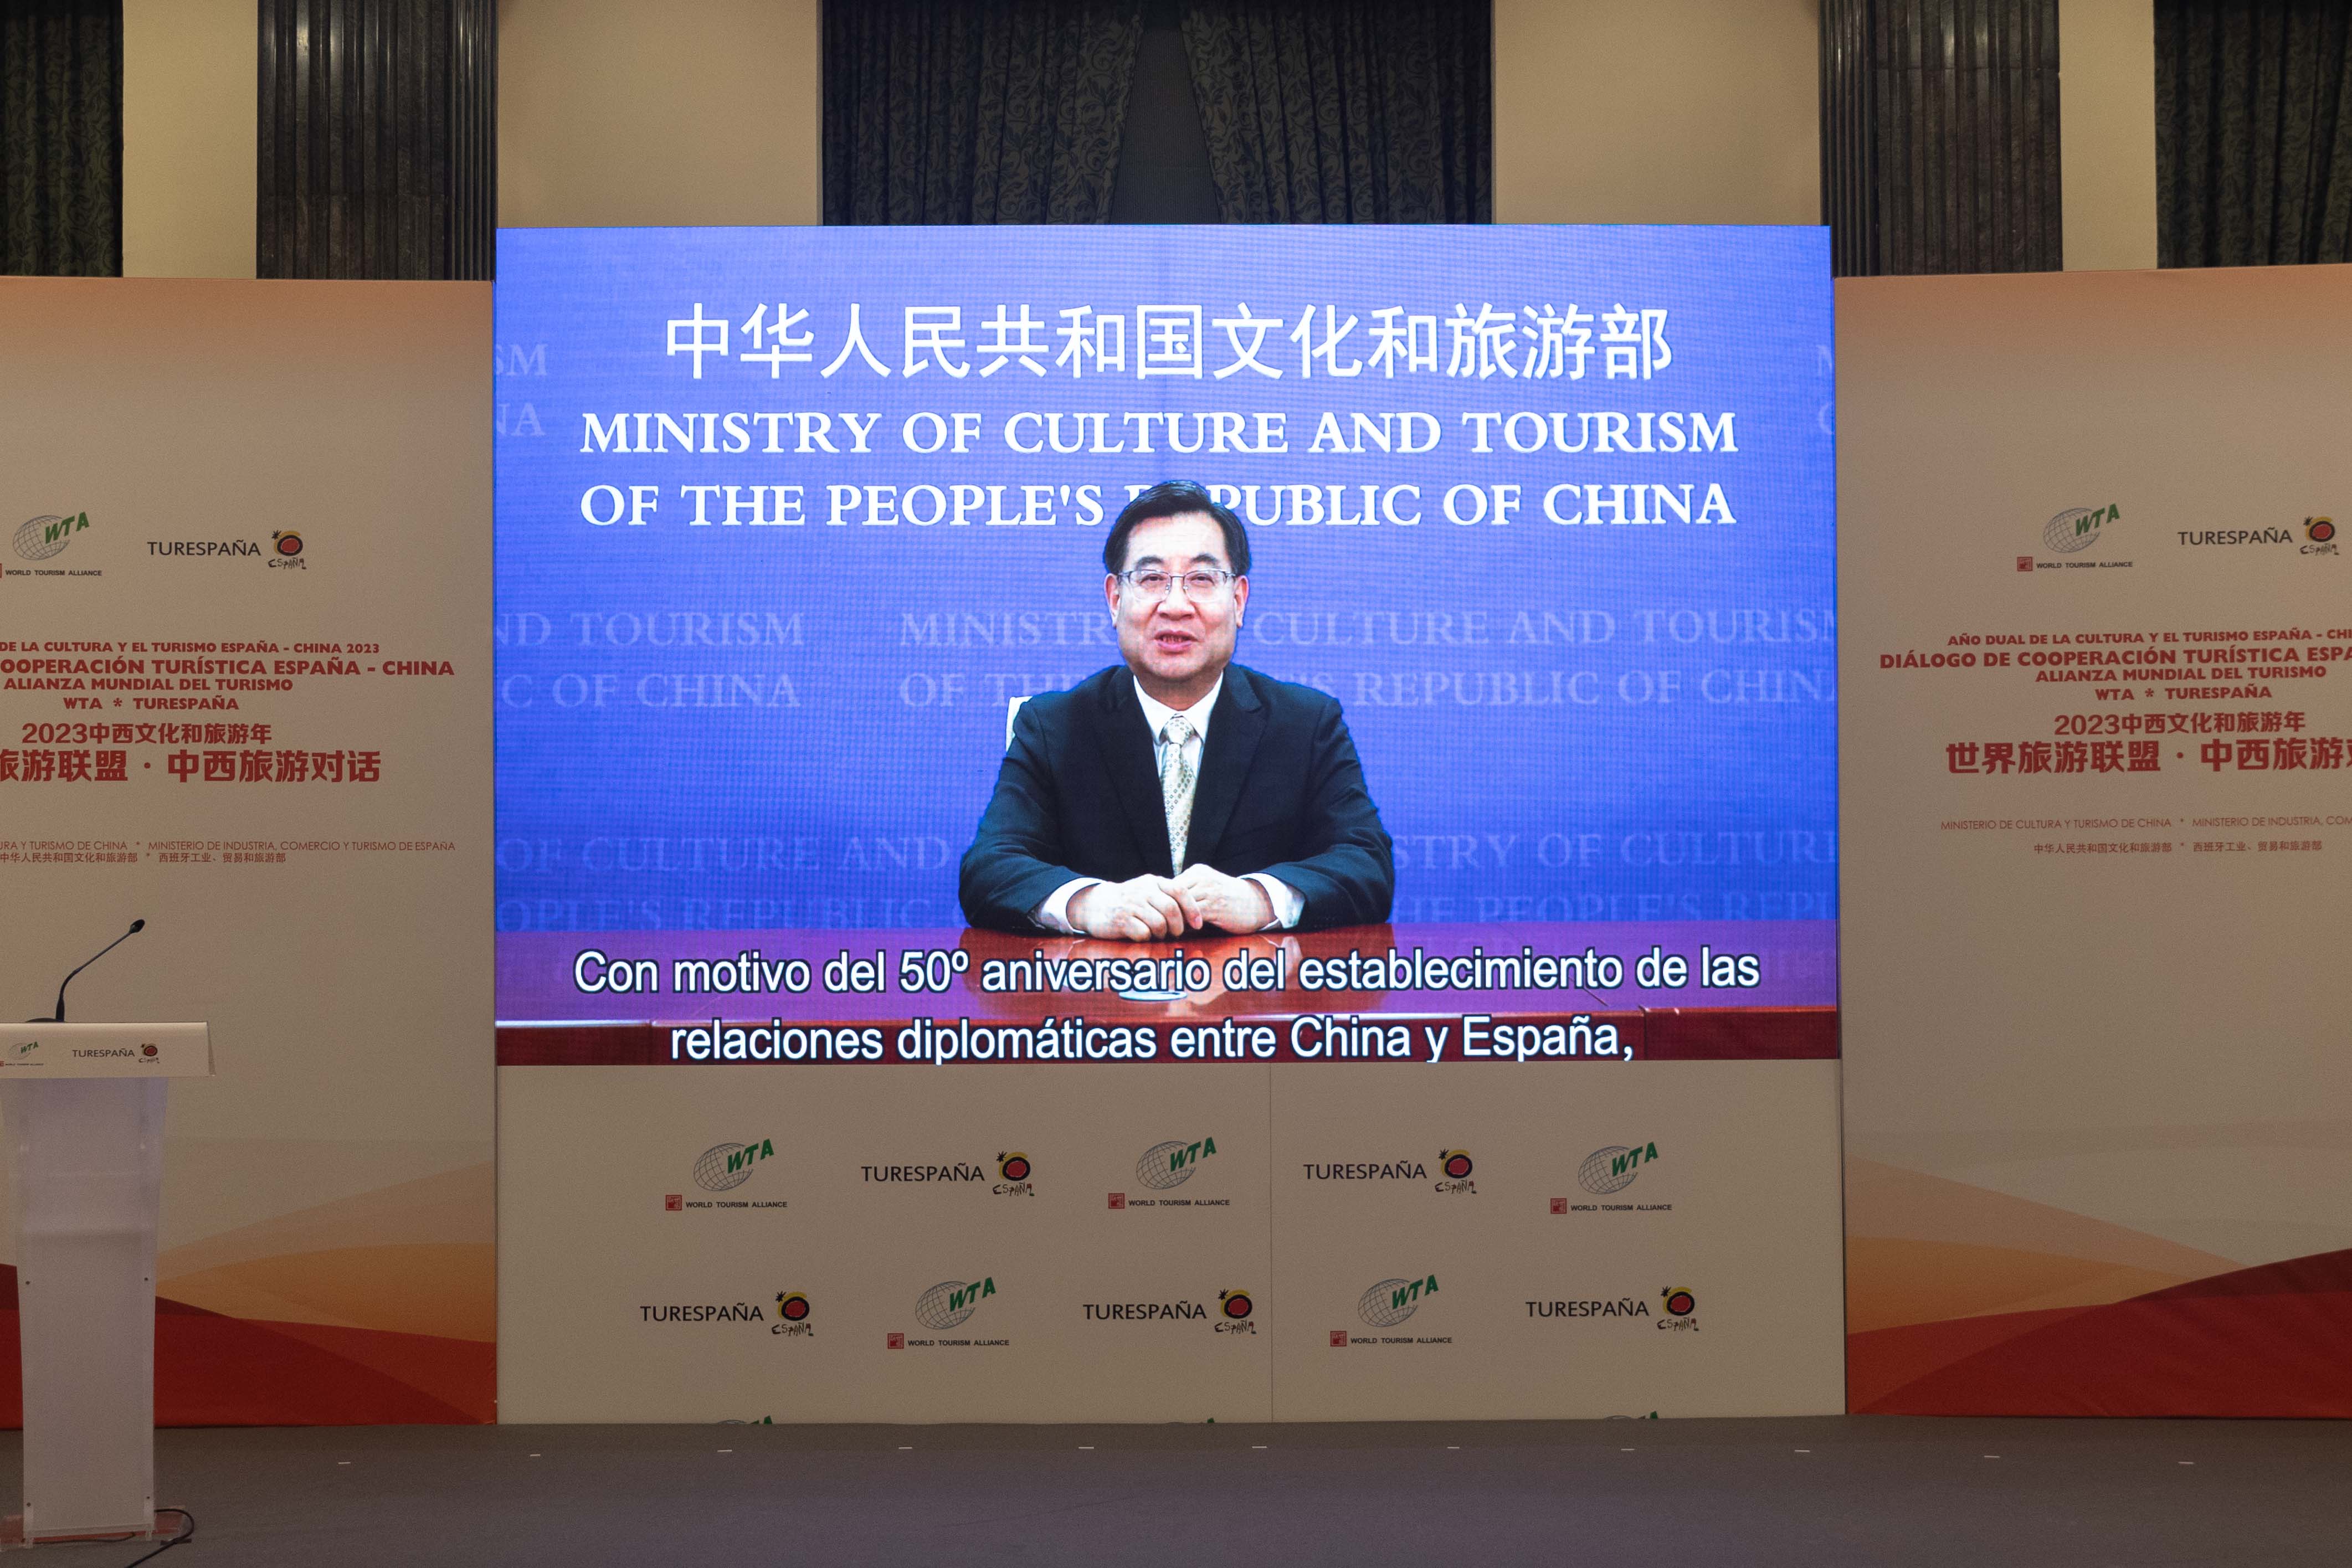 HU Heping, Minister of Culture and Tourism of the People’s Republic of China